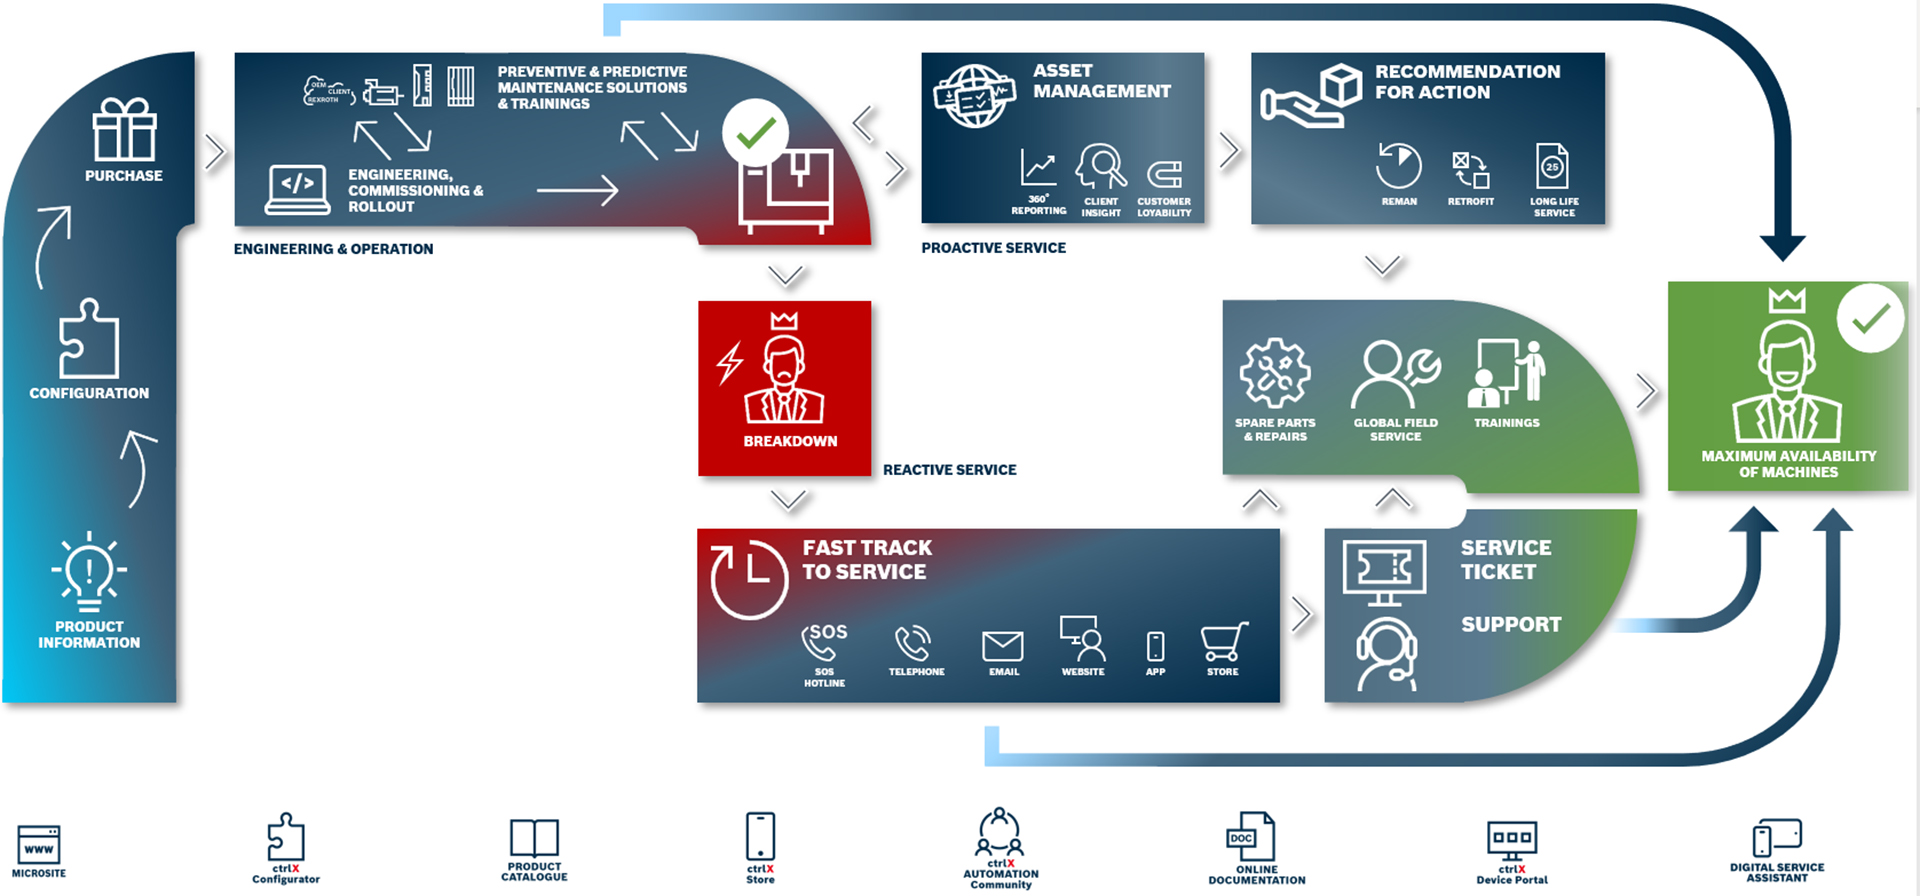 English language graphic shows the product life cycle of Bosch Rexroth products and how this can be extended through targeted service measures.